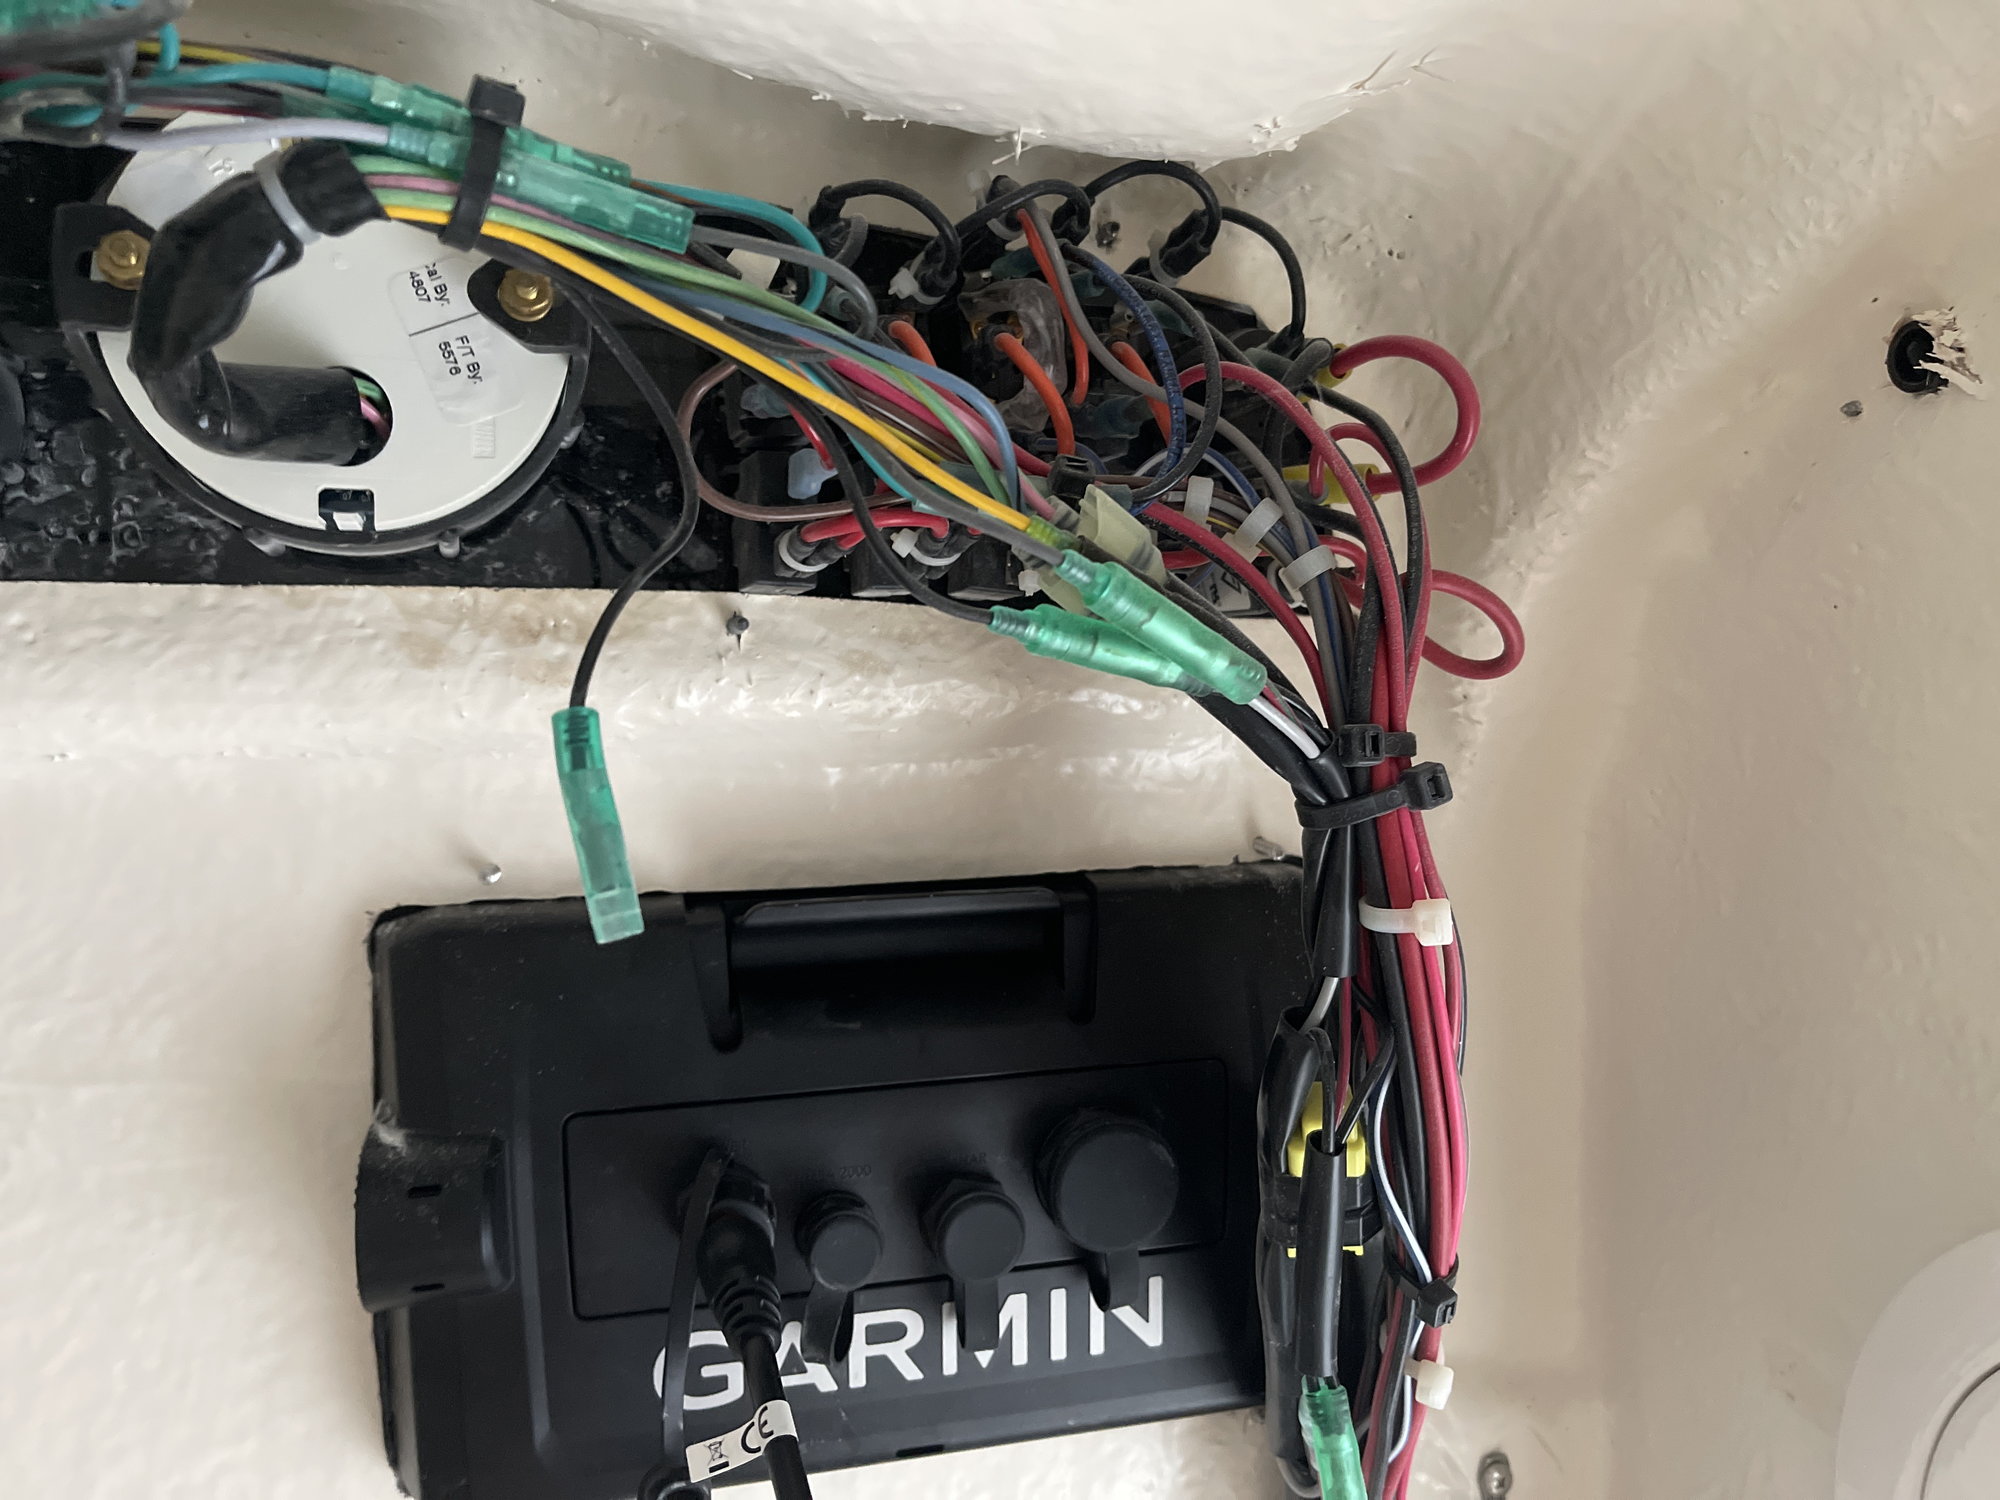 Wiring help! New boat fish finder install - The Hull Truth - Boating and  Fishing Forum